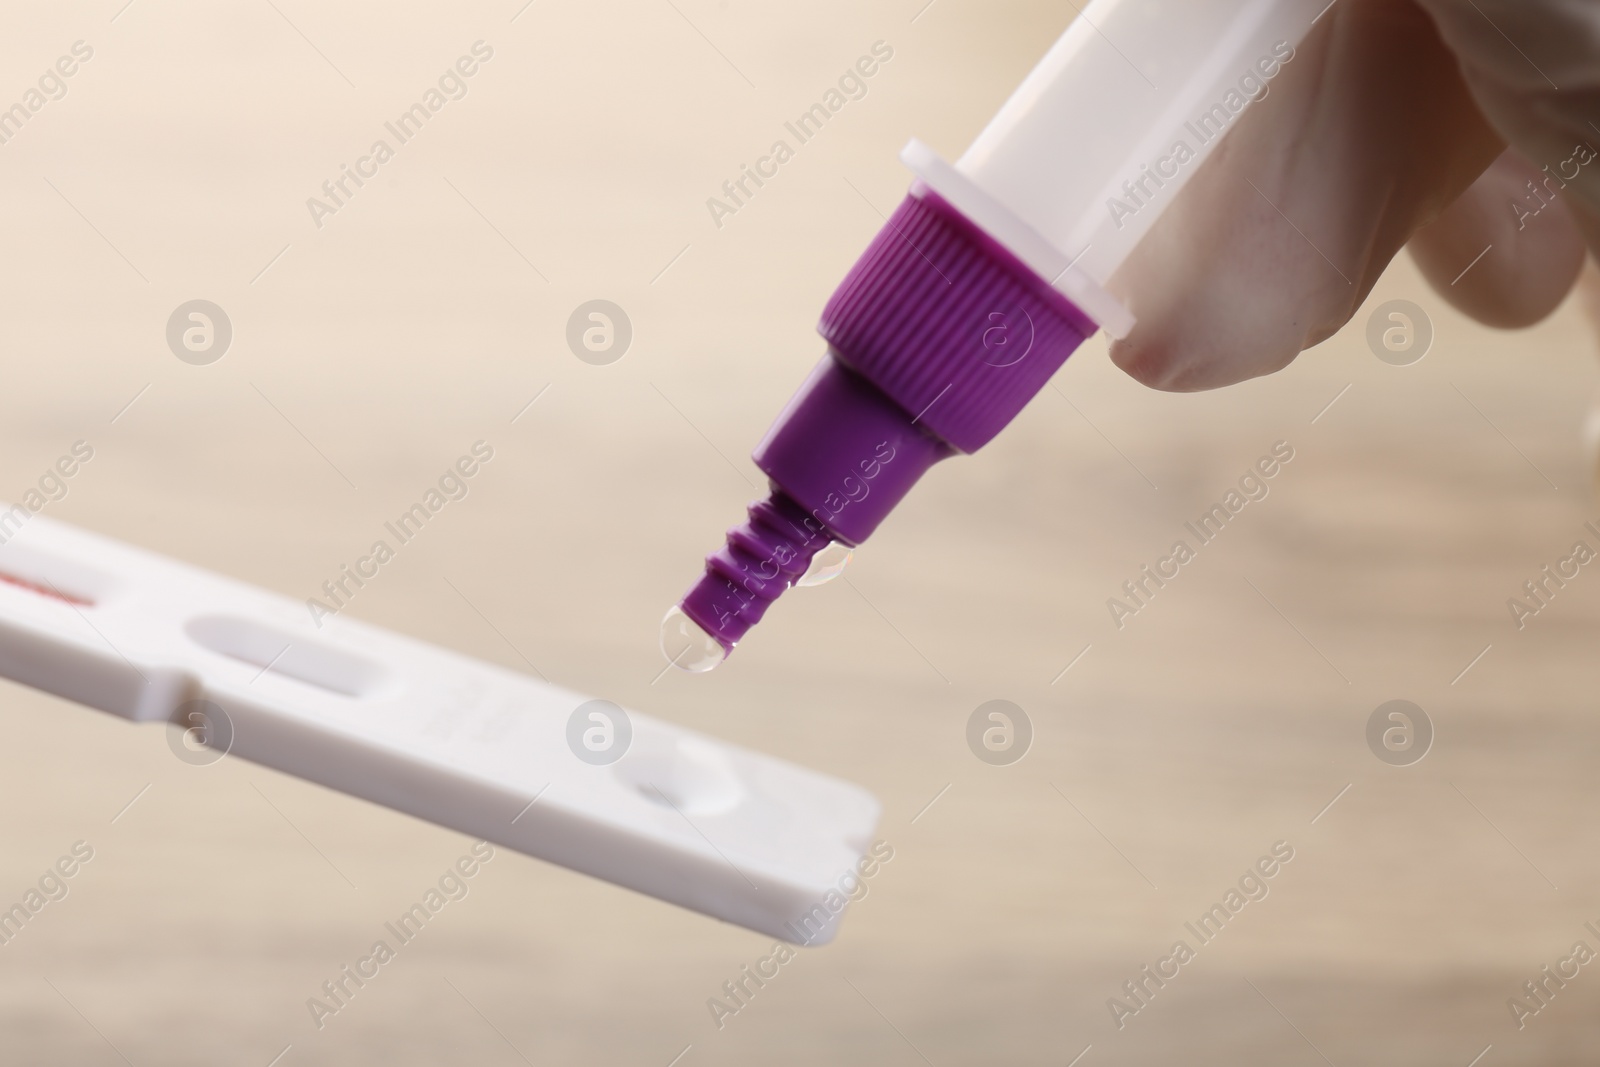 Photo of Doctor dropping buffer solution onto disposable express test cassette against blurred background, closeup